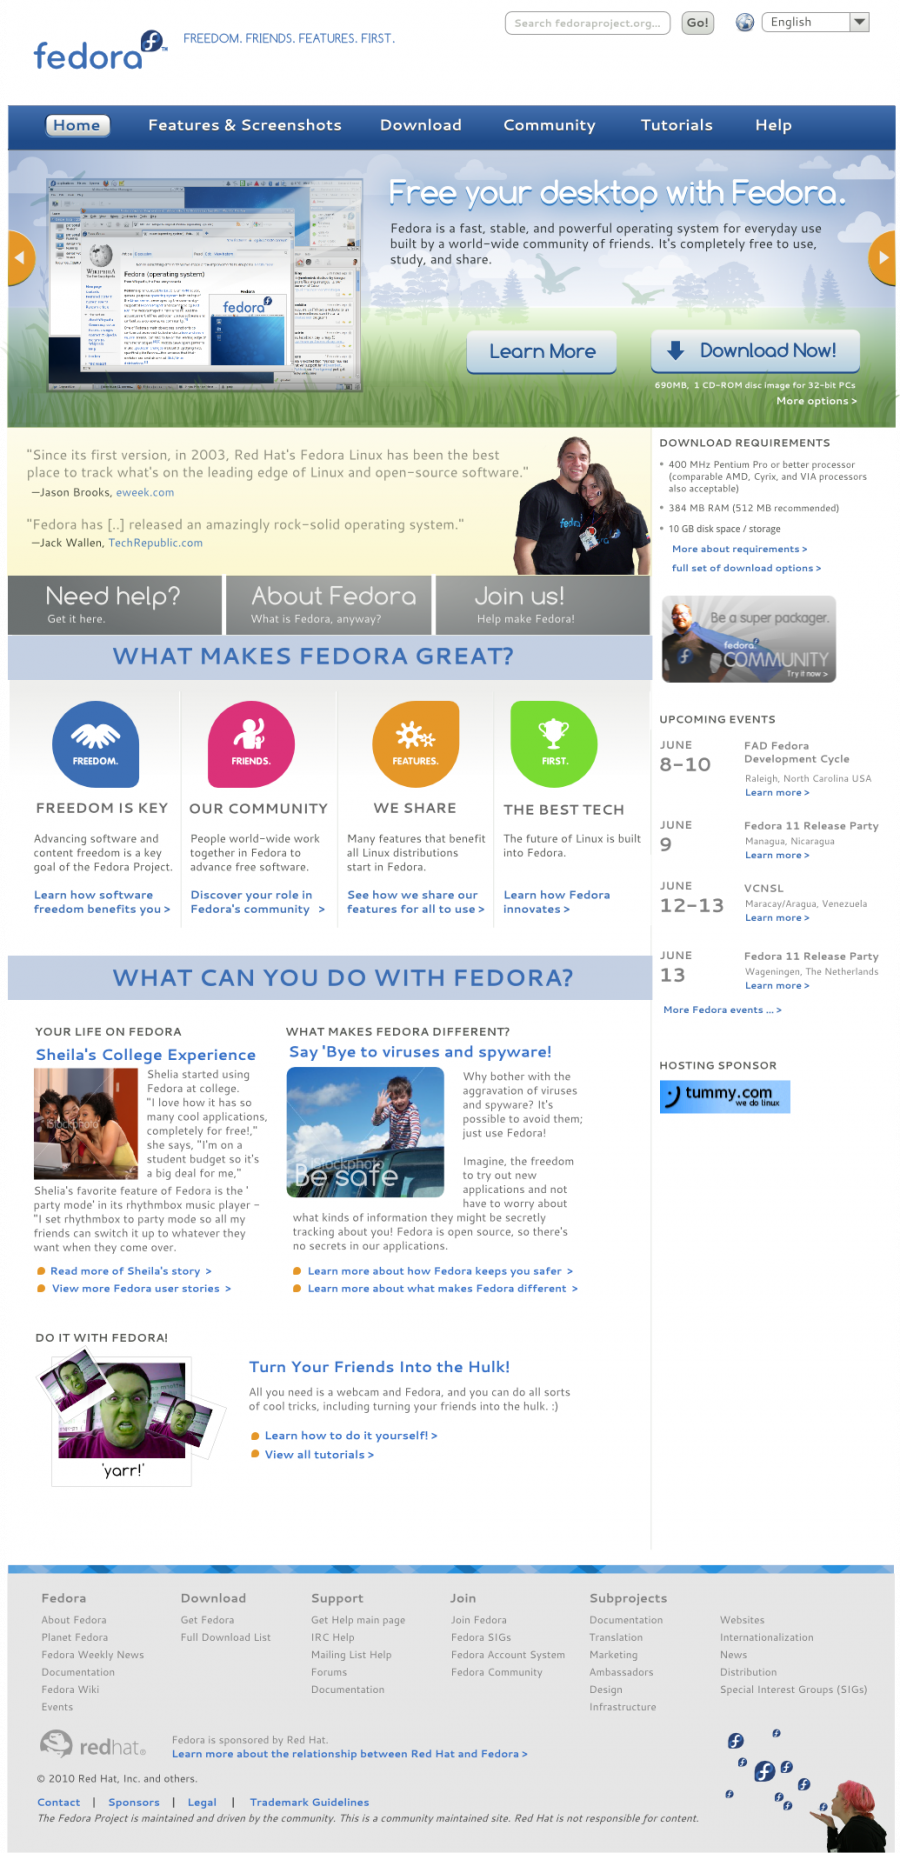 Wwwfpo-redesign-2010 1b-frontpage.png